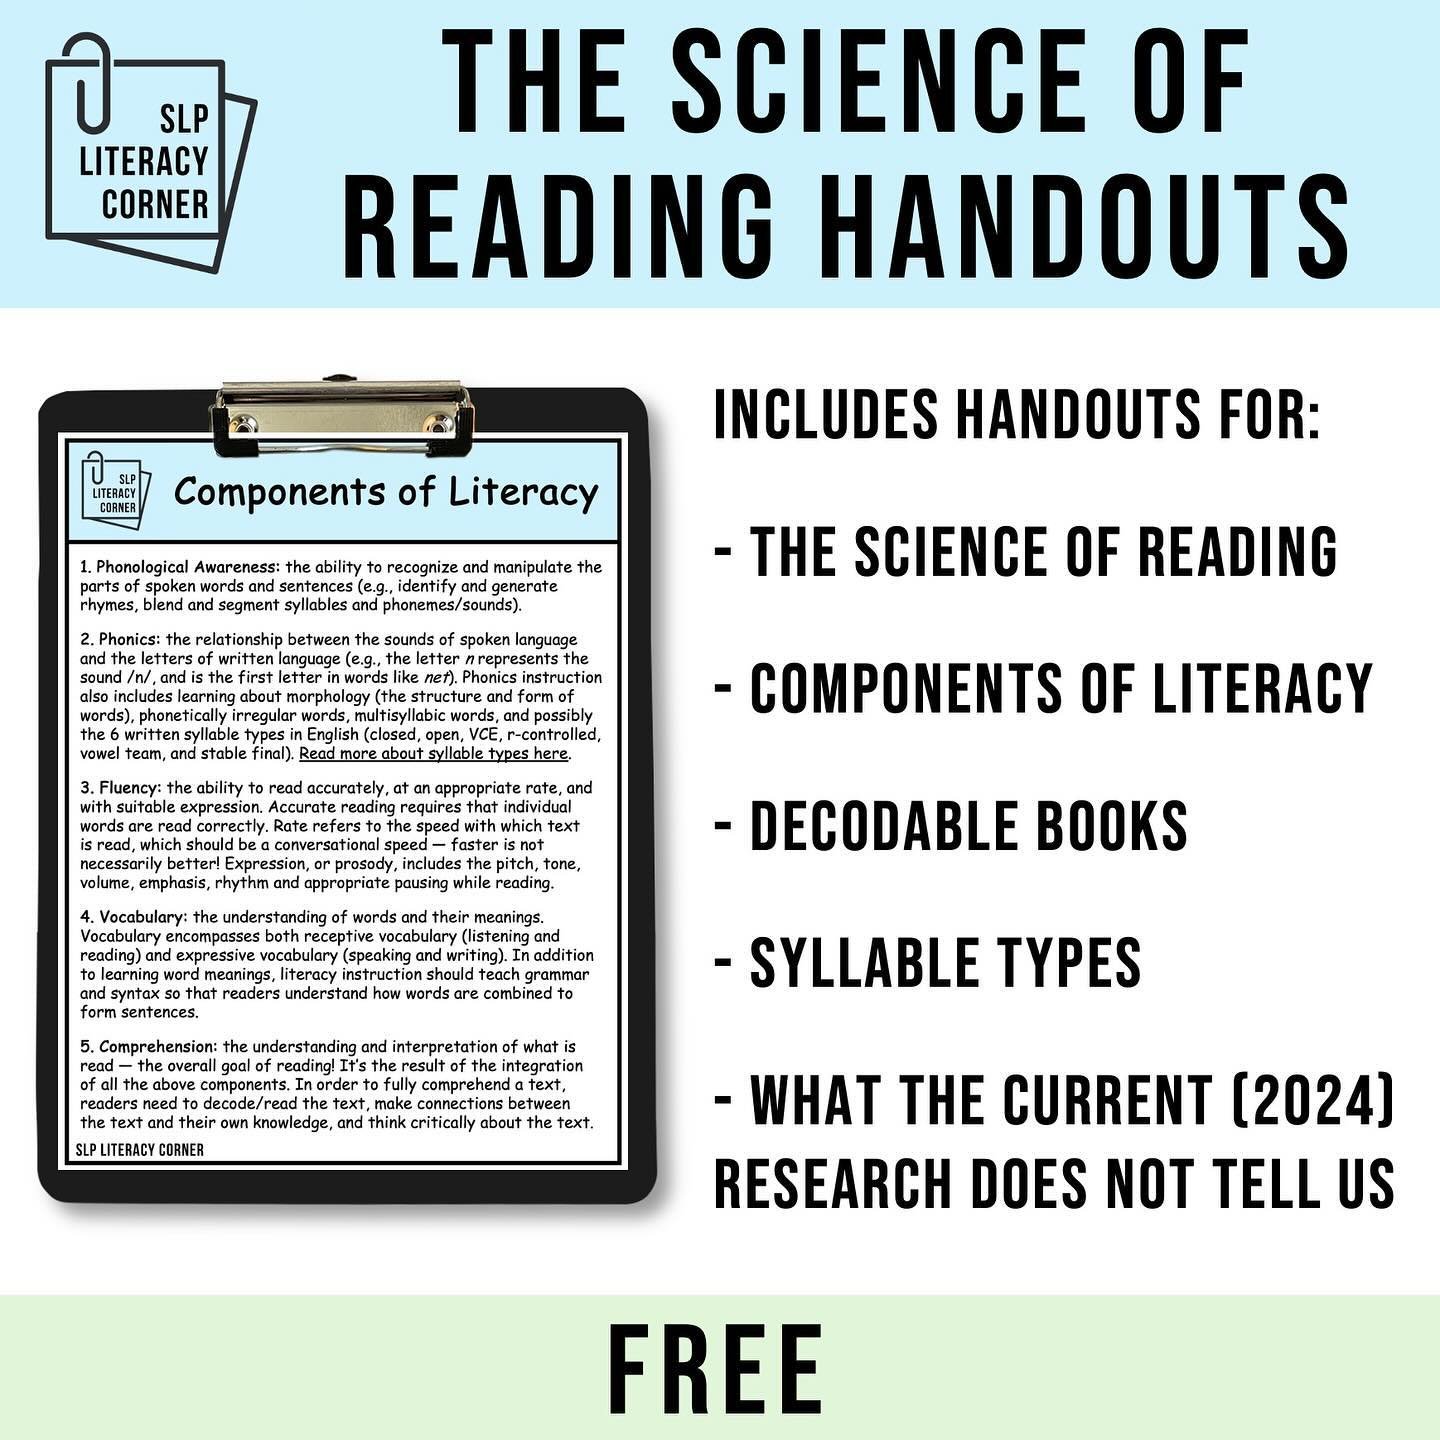 ✨UPDATED✨ FREE Science of Reading Handouts

💡Make sure everyone at your school or on your team is informed about the science of reading (SOR) - the collection of research from multiple disciplines (e.g., psychology, neuroscience, education) that pro